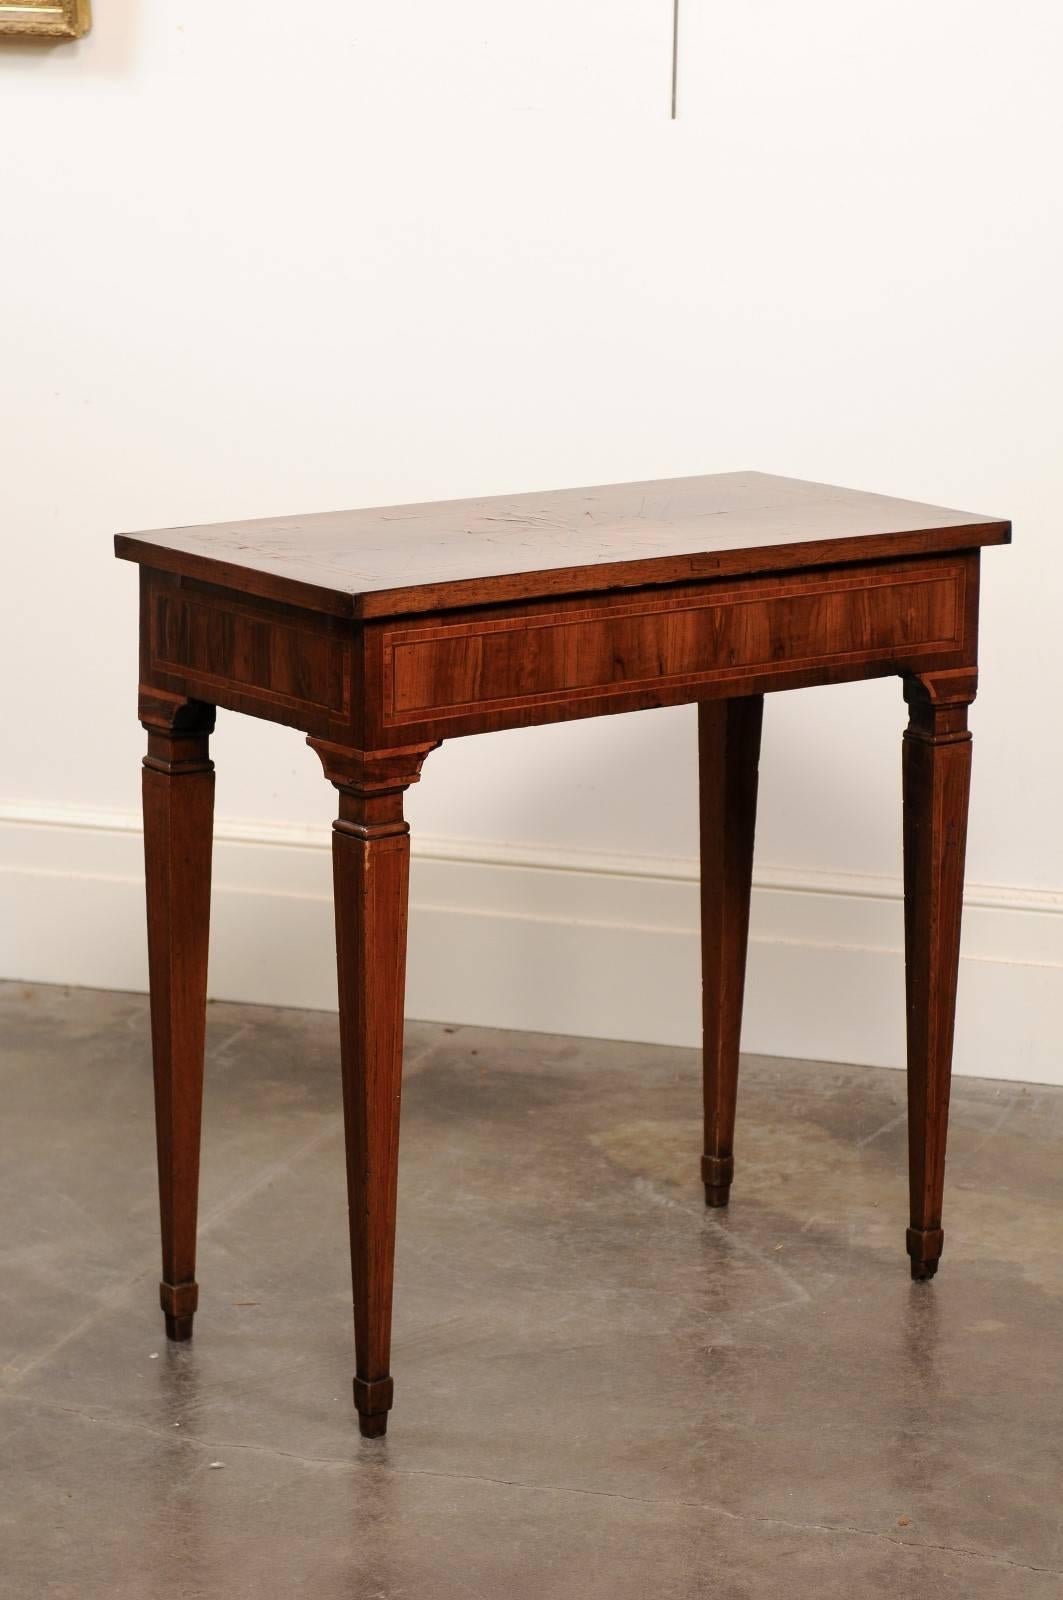 This Italian console table from the late 18th century features an exquisite rectangular top decorated with a delicate marquetry. An inlaid banding frames the top, receiving in its centre a beautifully designed star motif. The apron is also adorned